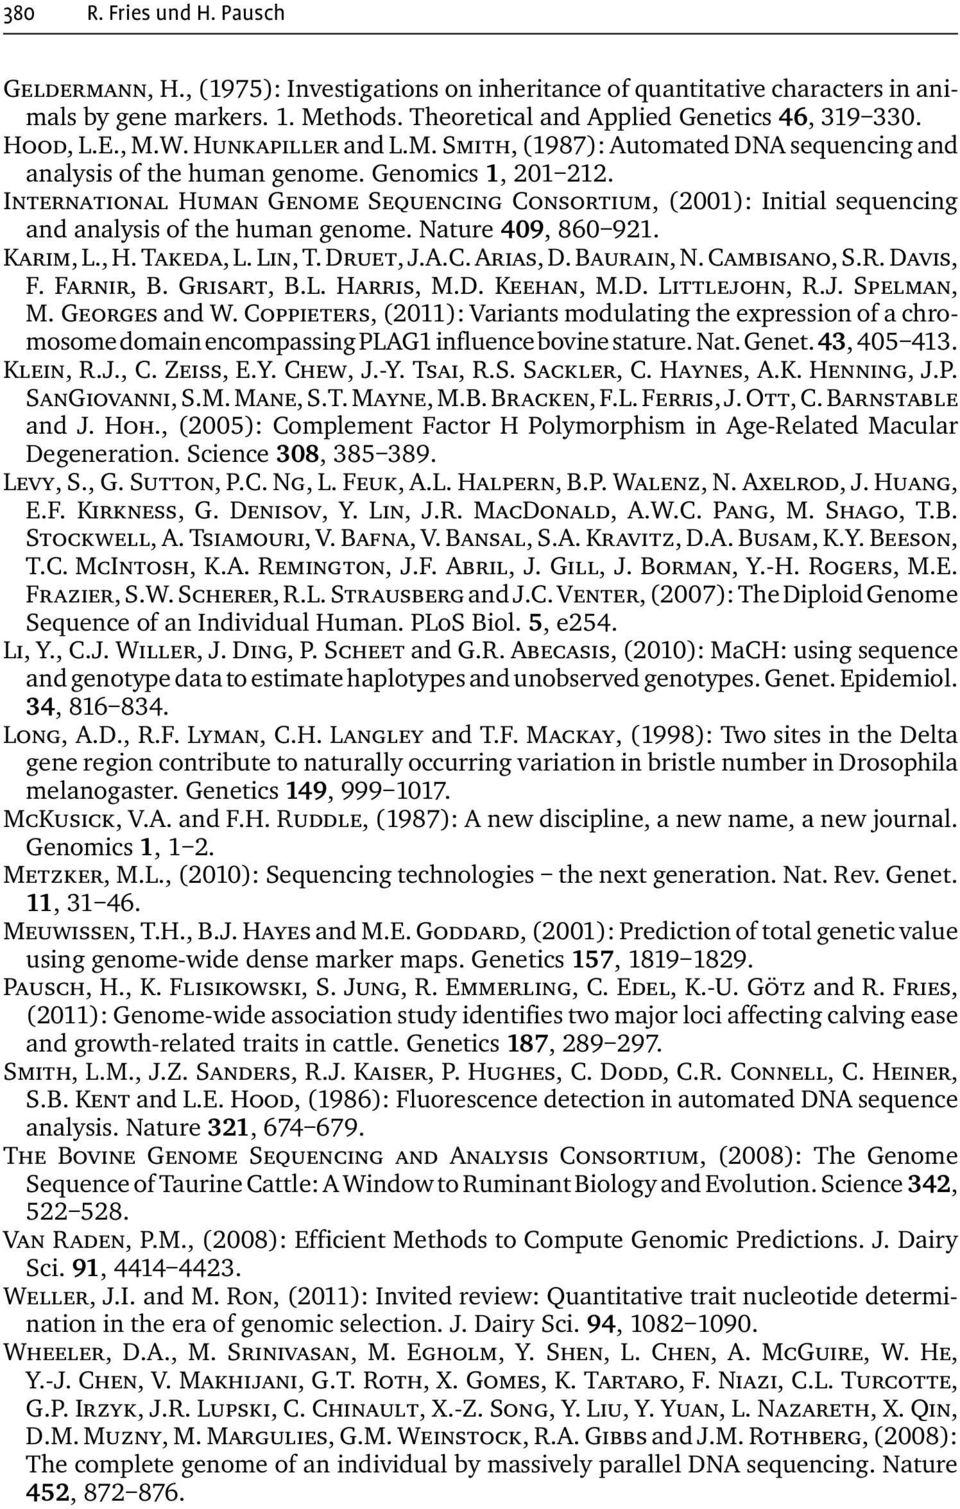 International Human Genome Sequencing Consortium, (2001): Initial sequencing and analysis of the human genome. Nature 409, 860 921. Karim, L., H. Takeda, L. Lin, T. Druet, J.A.C. Arias, D. Baurain, N.